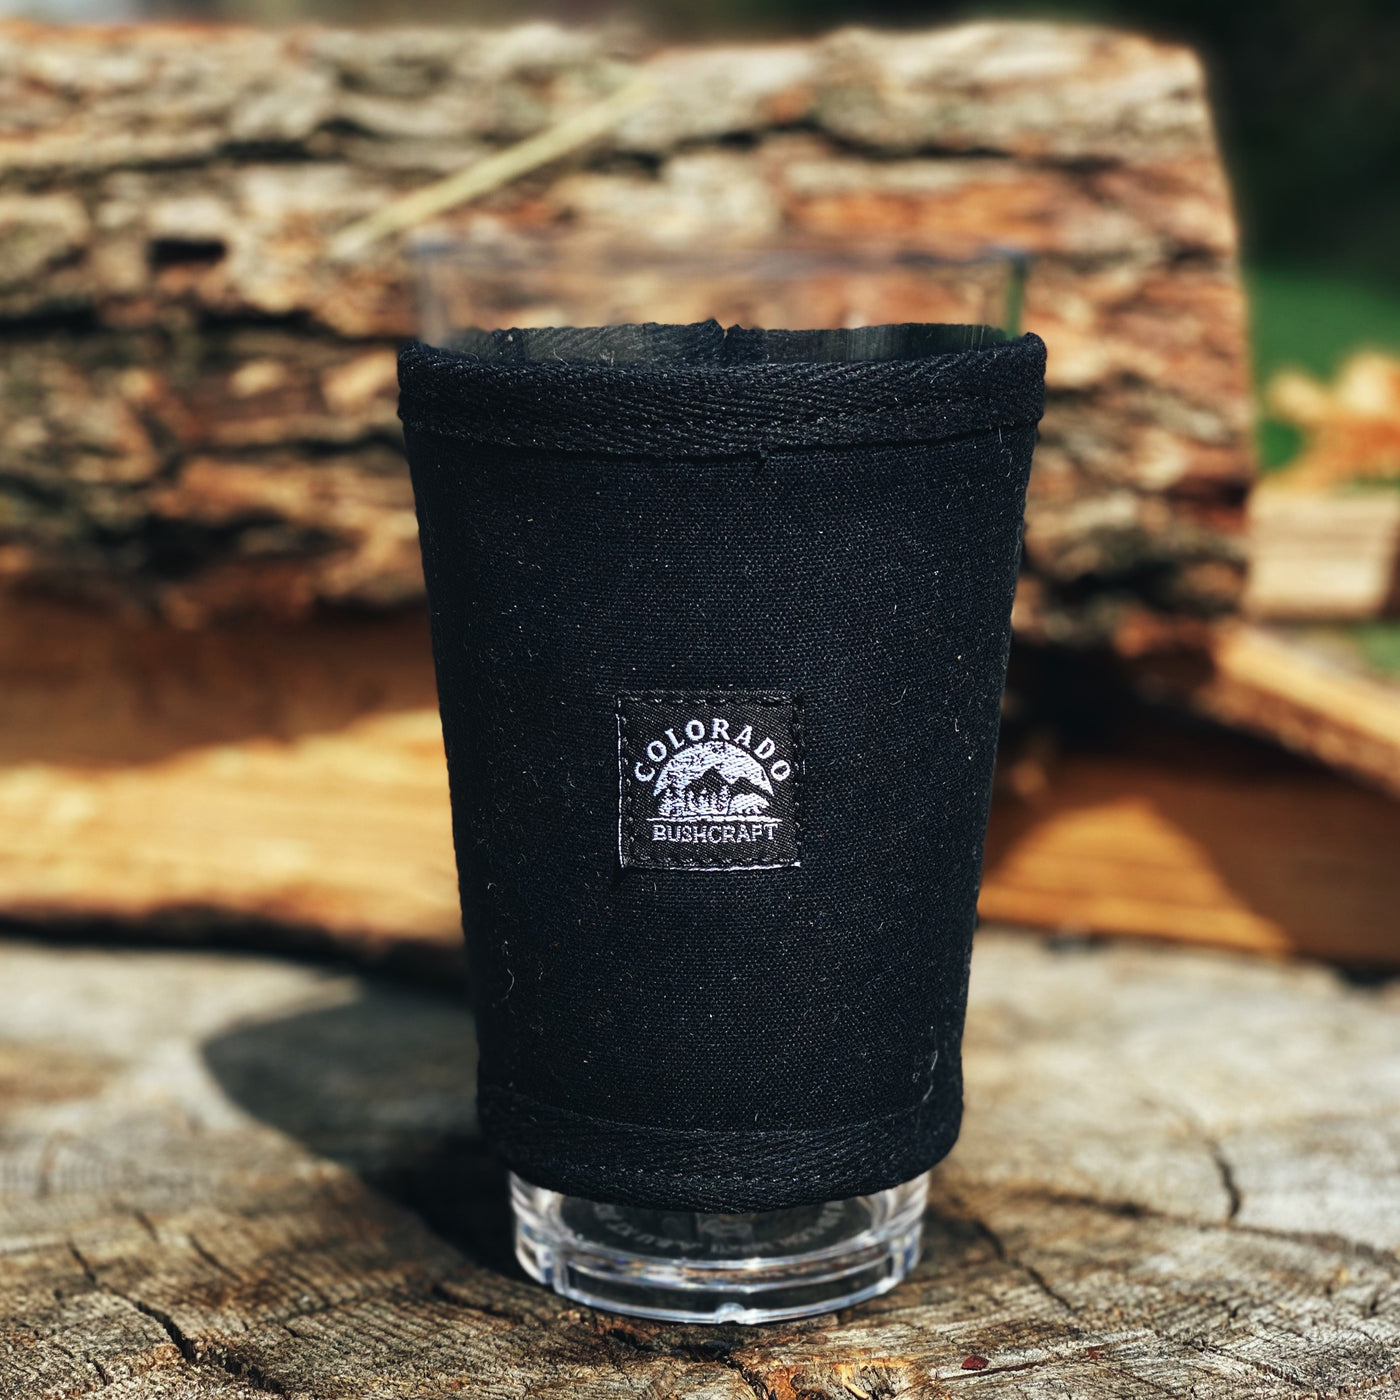 Bushcraft Waxed Canvas Pint Glass Cosy Cooler Coozie Cozy Insulated (Various Colors) - Colorado Bushcraft